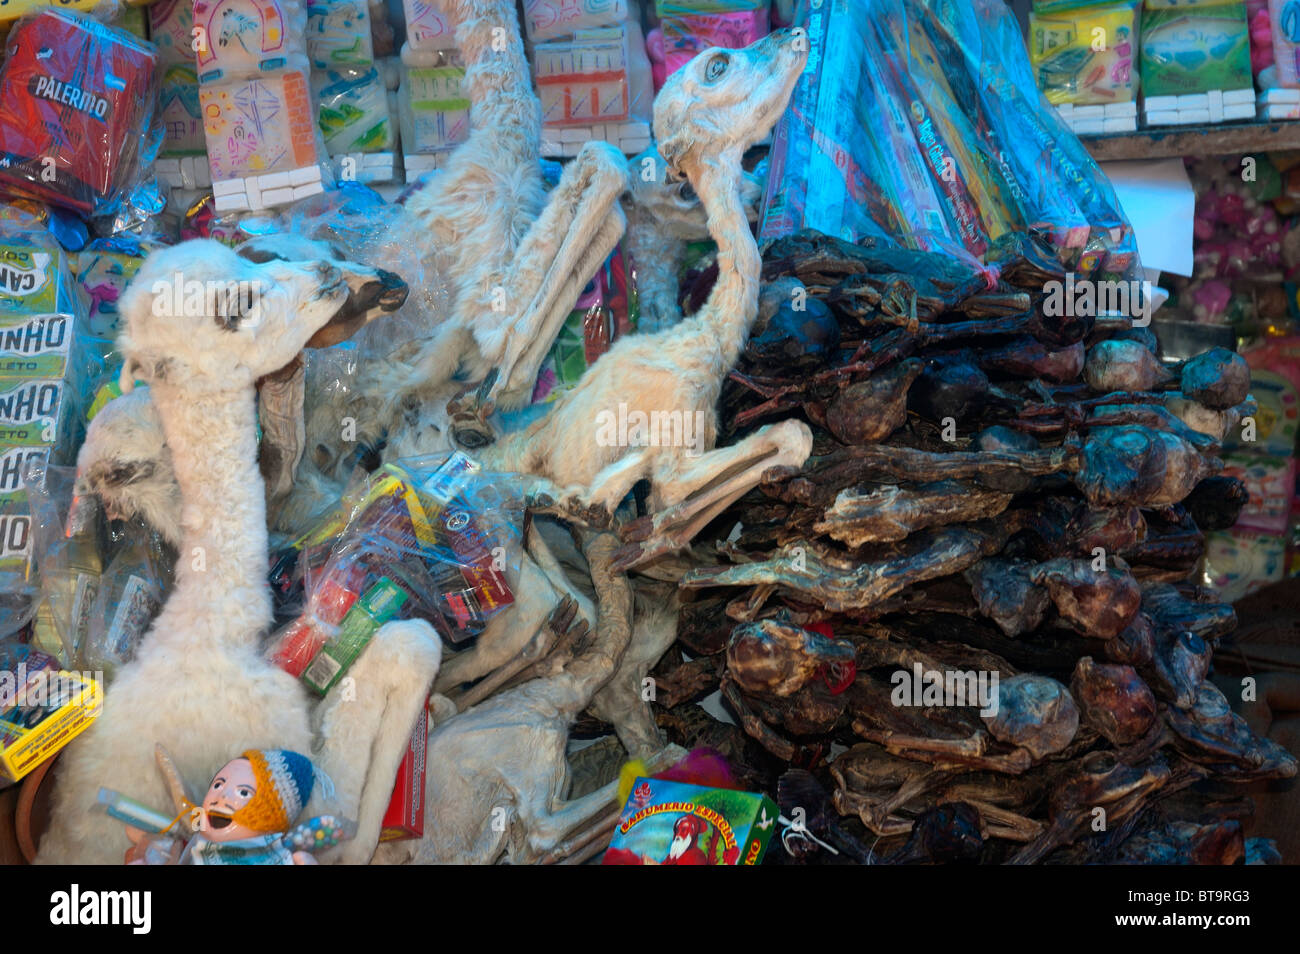 Aborted Llama fetus for sale as talisman, amulet, magic, ritual and traditional medicine in the Witches Market, La Paz, Bolivia. Stock Photo